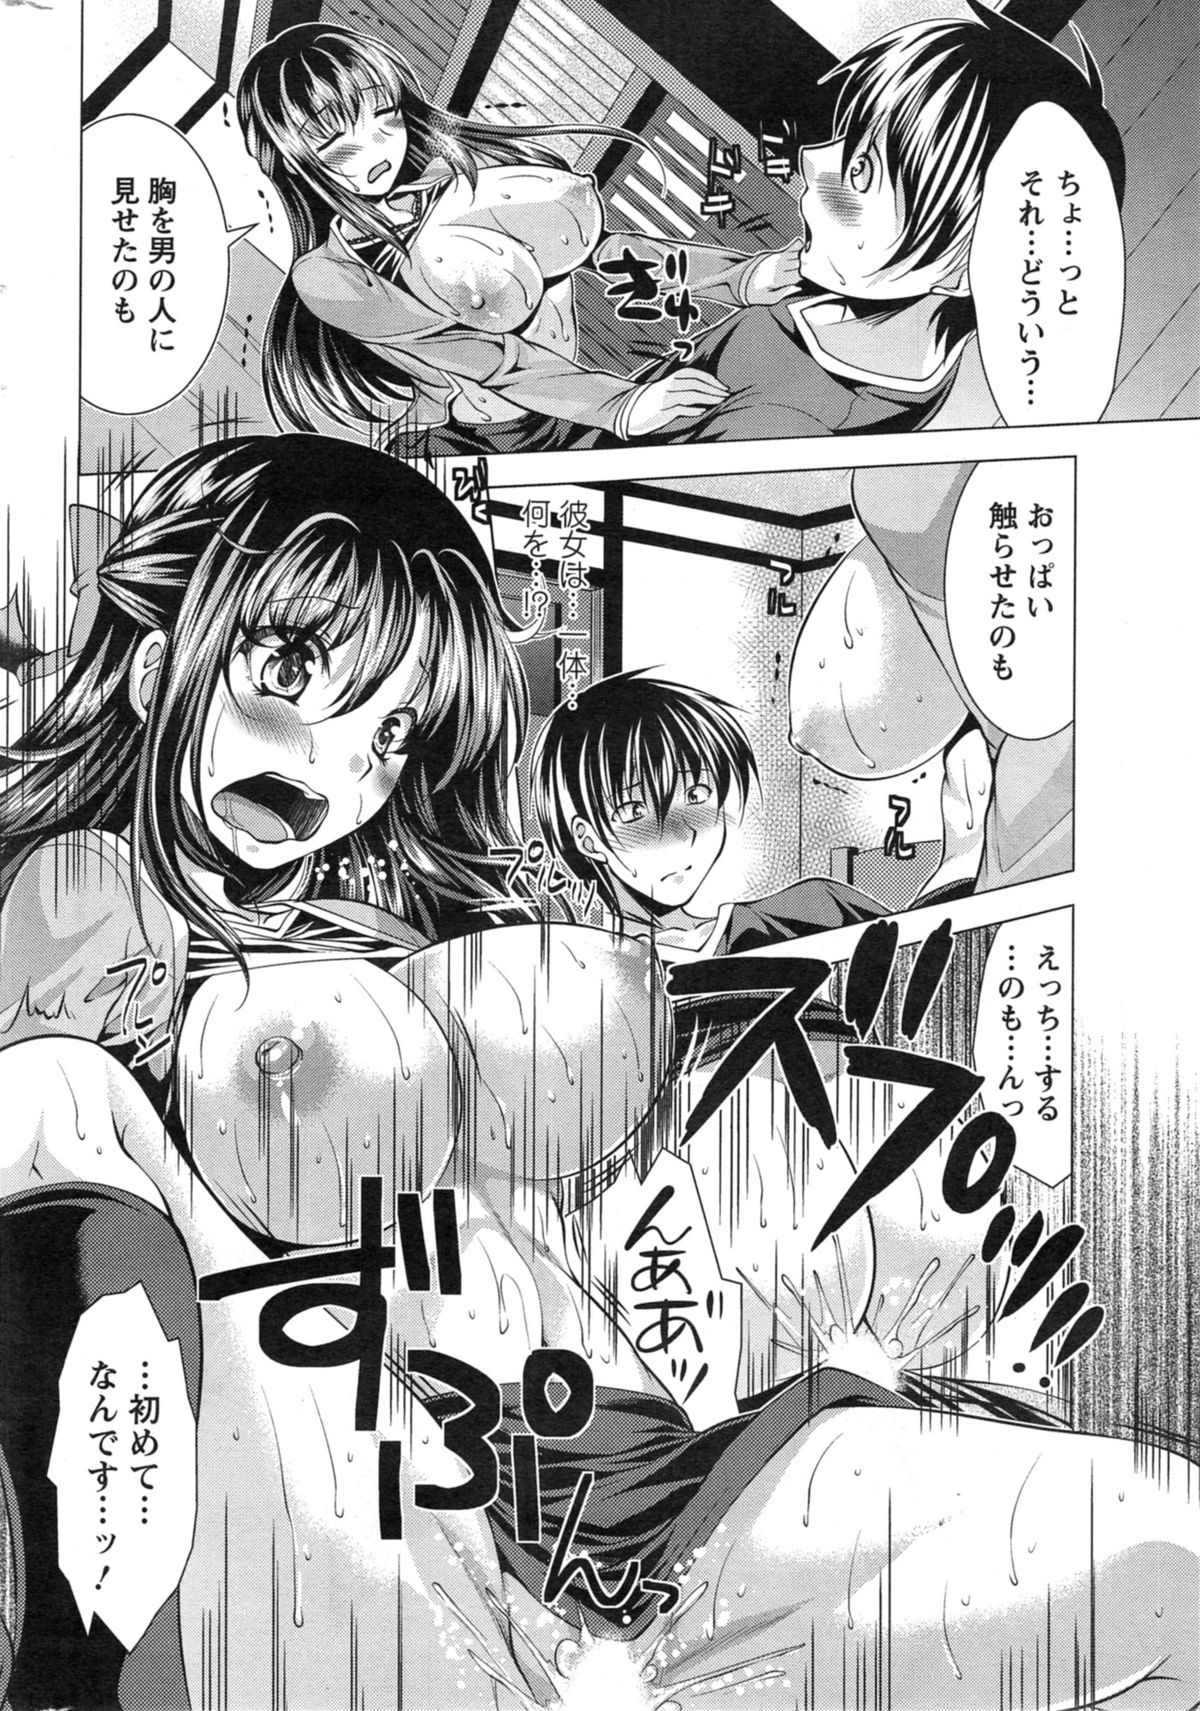 Action Pizazz 2014-02 page 14 full